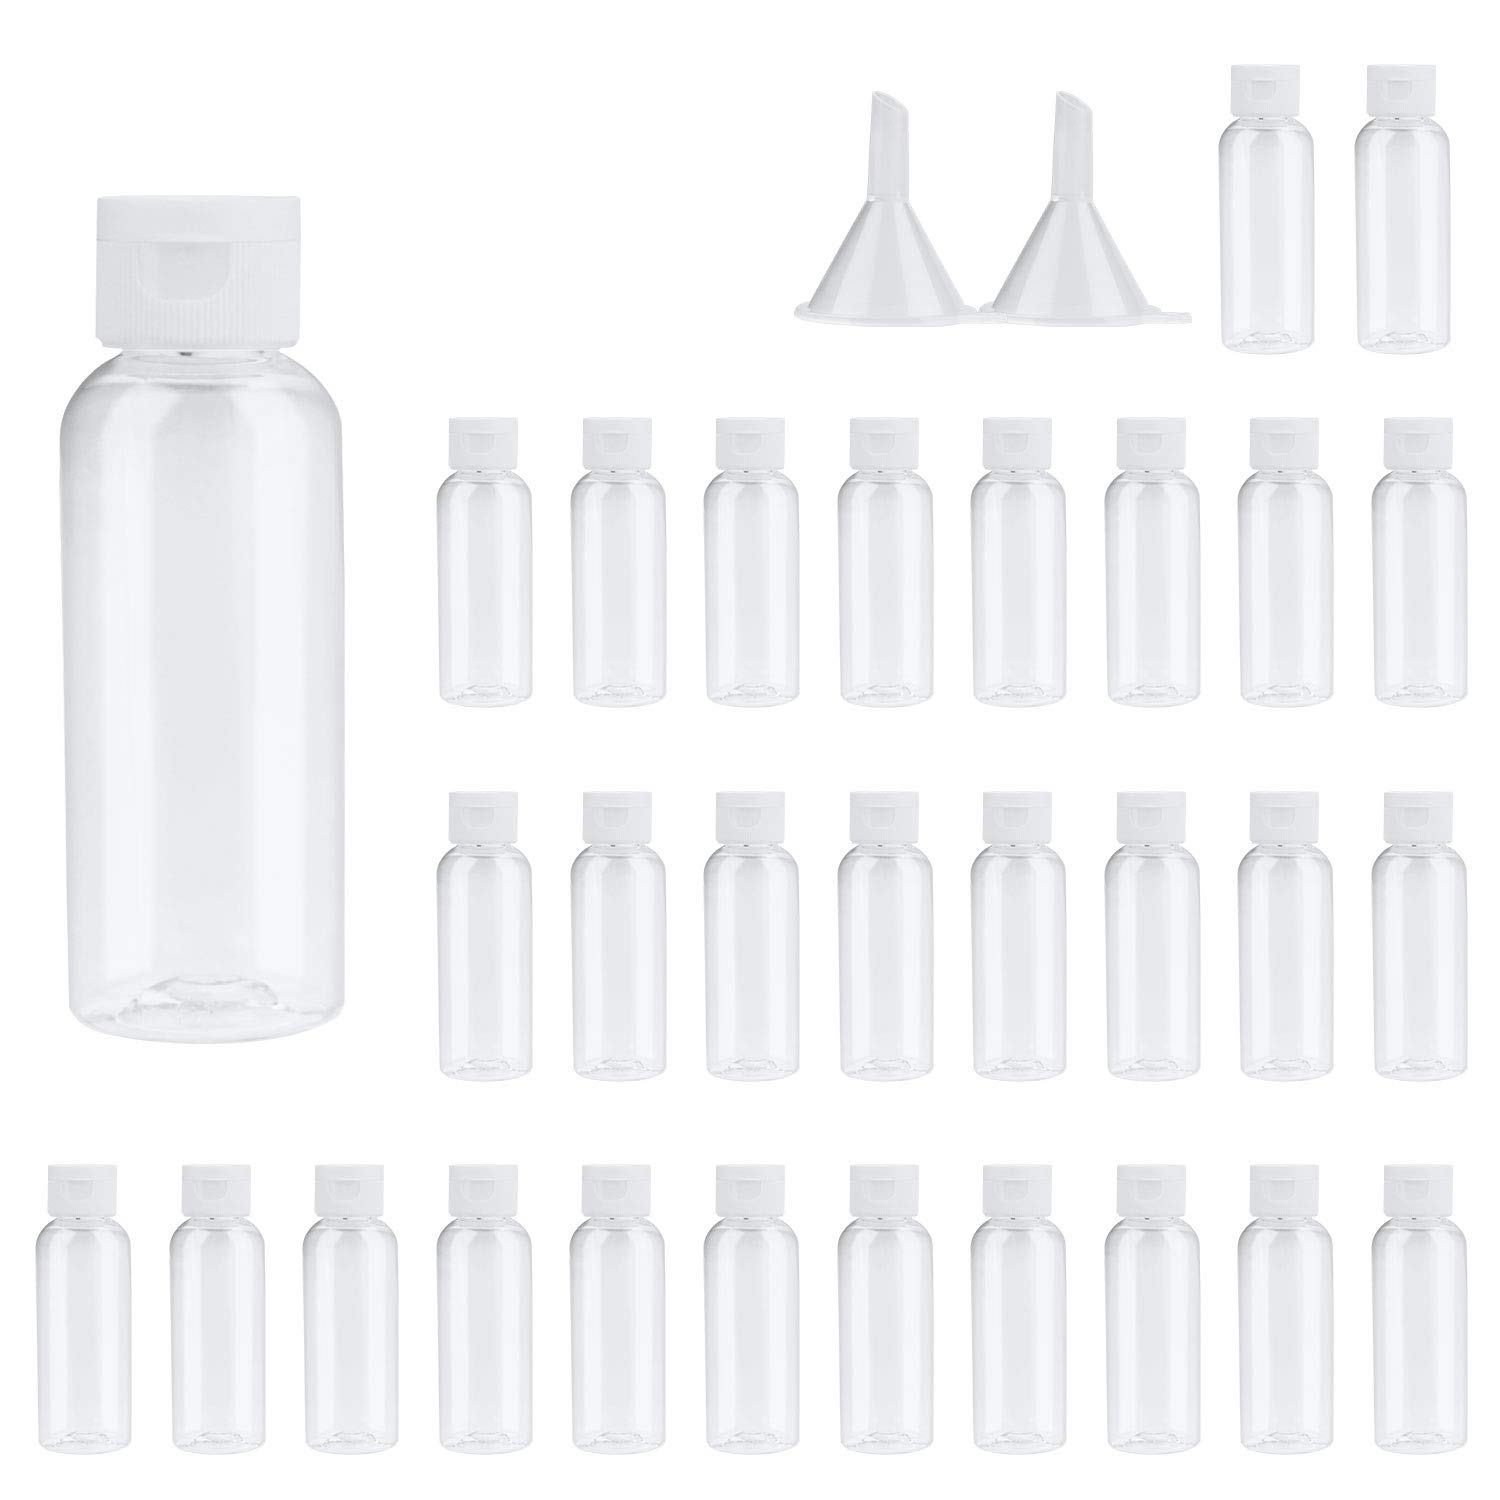 Travel Bottles TSA Approved，2 oz Plastic Bottles Small Squeeze Bottles Leak Proof Silicone Travel Size Containers with Flip Cap (30 Bottles)